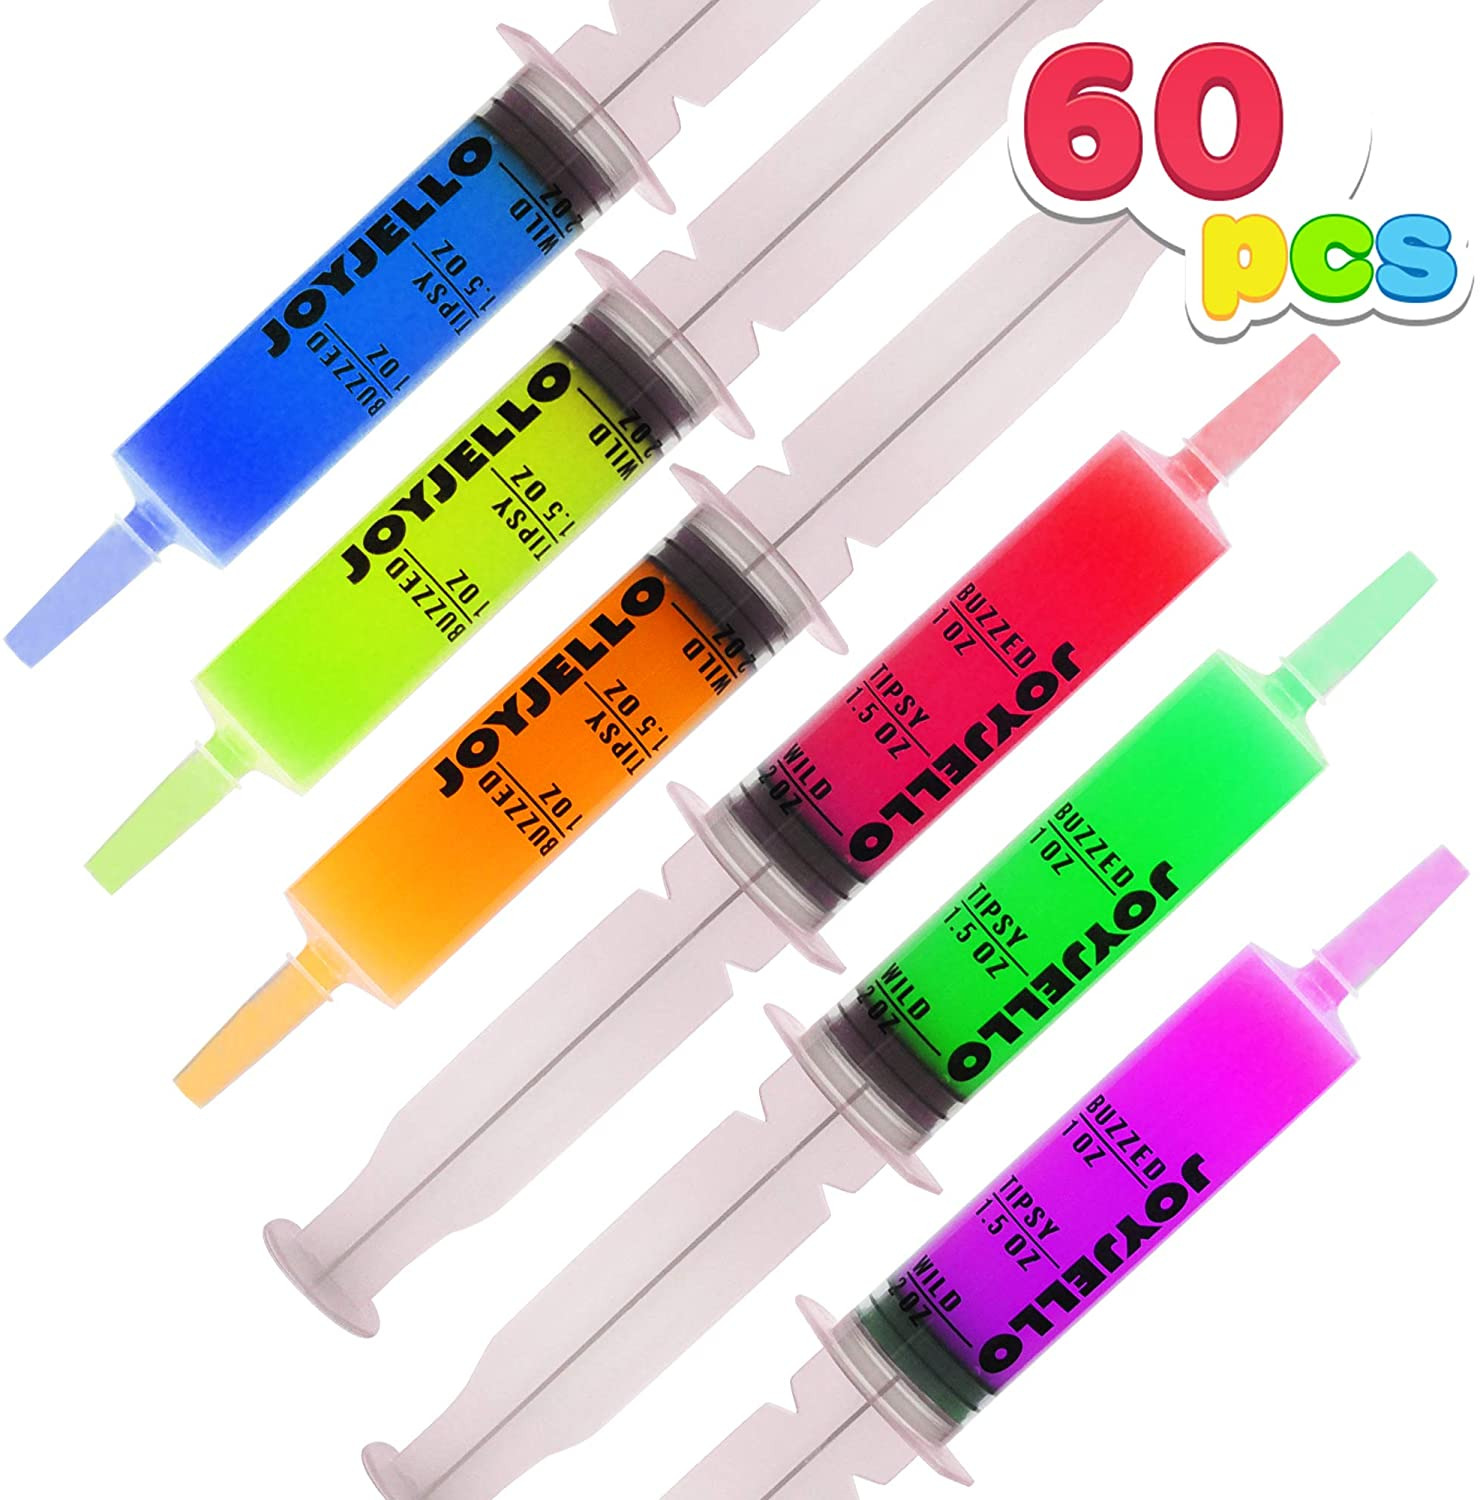 60 Pcs Jello Syringes, 2 Oz Reusable Plastic Tubes, Container With Caps For Summ